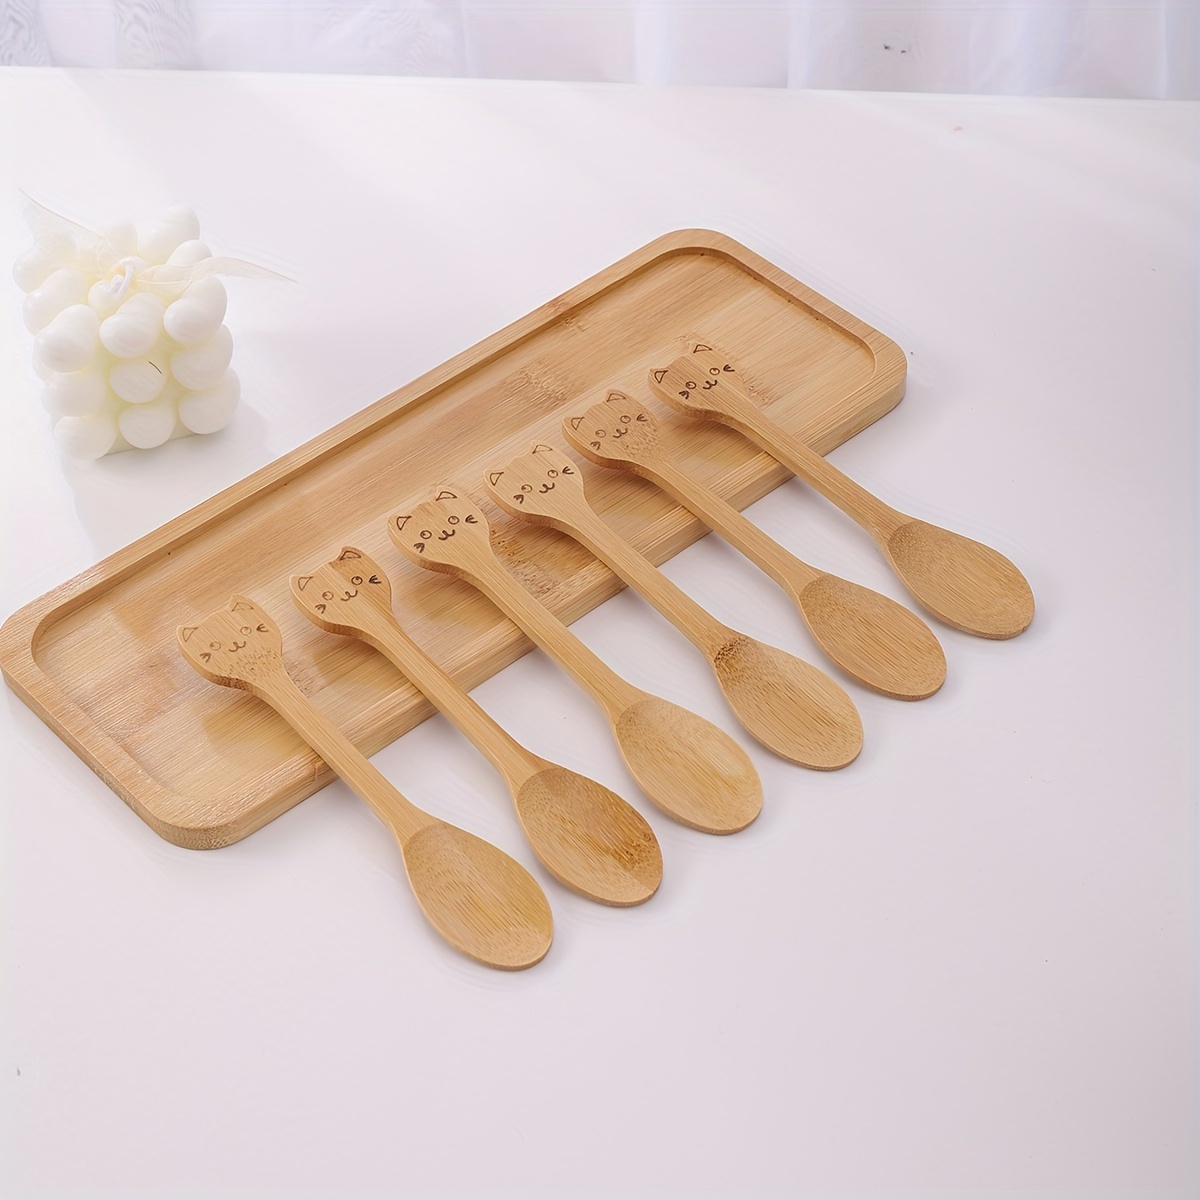 Spoon, Bamboo Cartoon Spoons, Spice Spoons, Cute Kitchen Measuring Spoons,  Tea Spoon, Coffee Spoons, Sugar Measuring Spoons, Small Wooden Spoons,  Short-handled Wooden Spoons For Milk Powder, Home Cooking Measurement  Tools, Kitchen Gadgets 